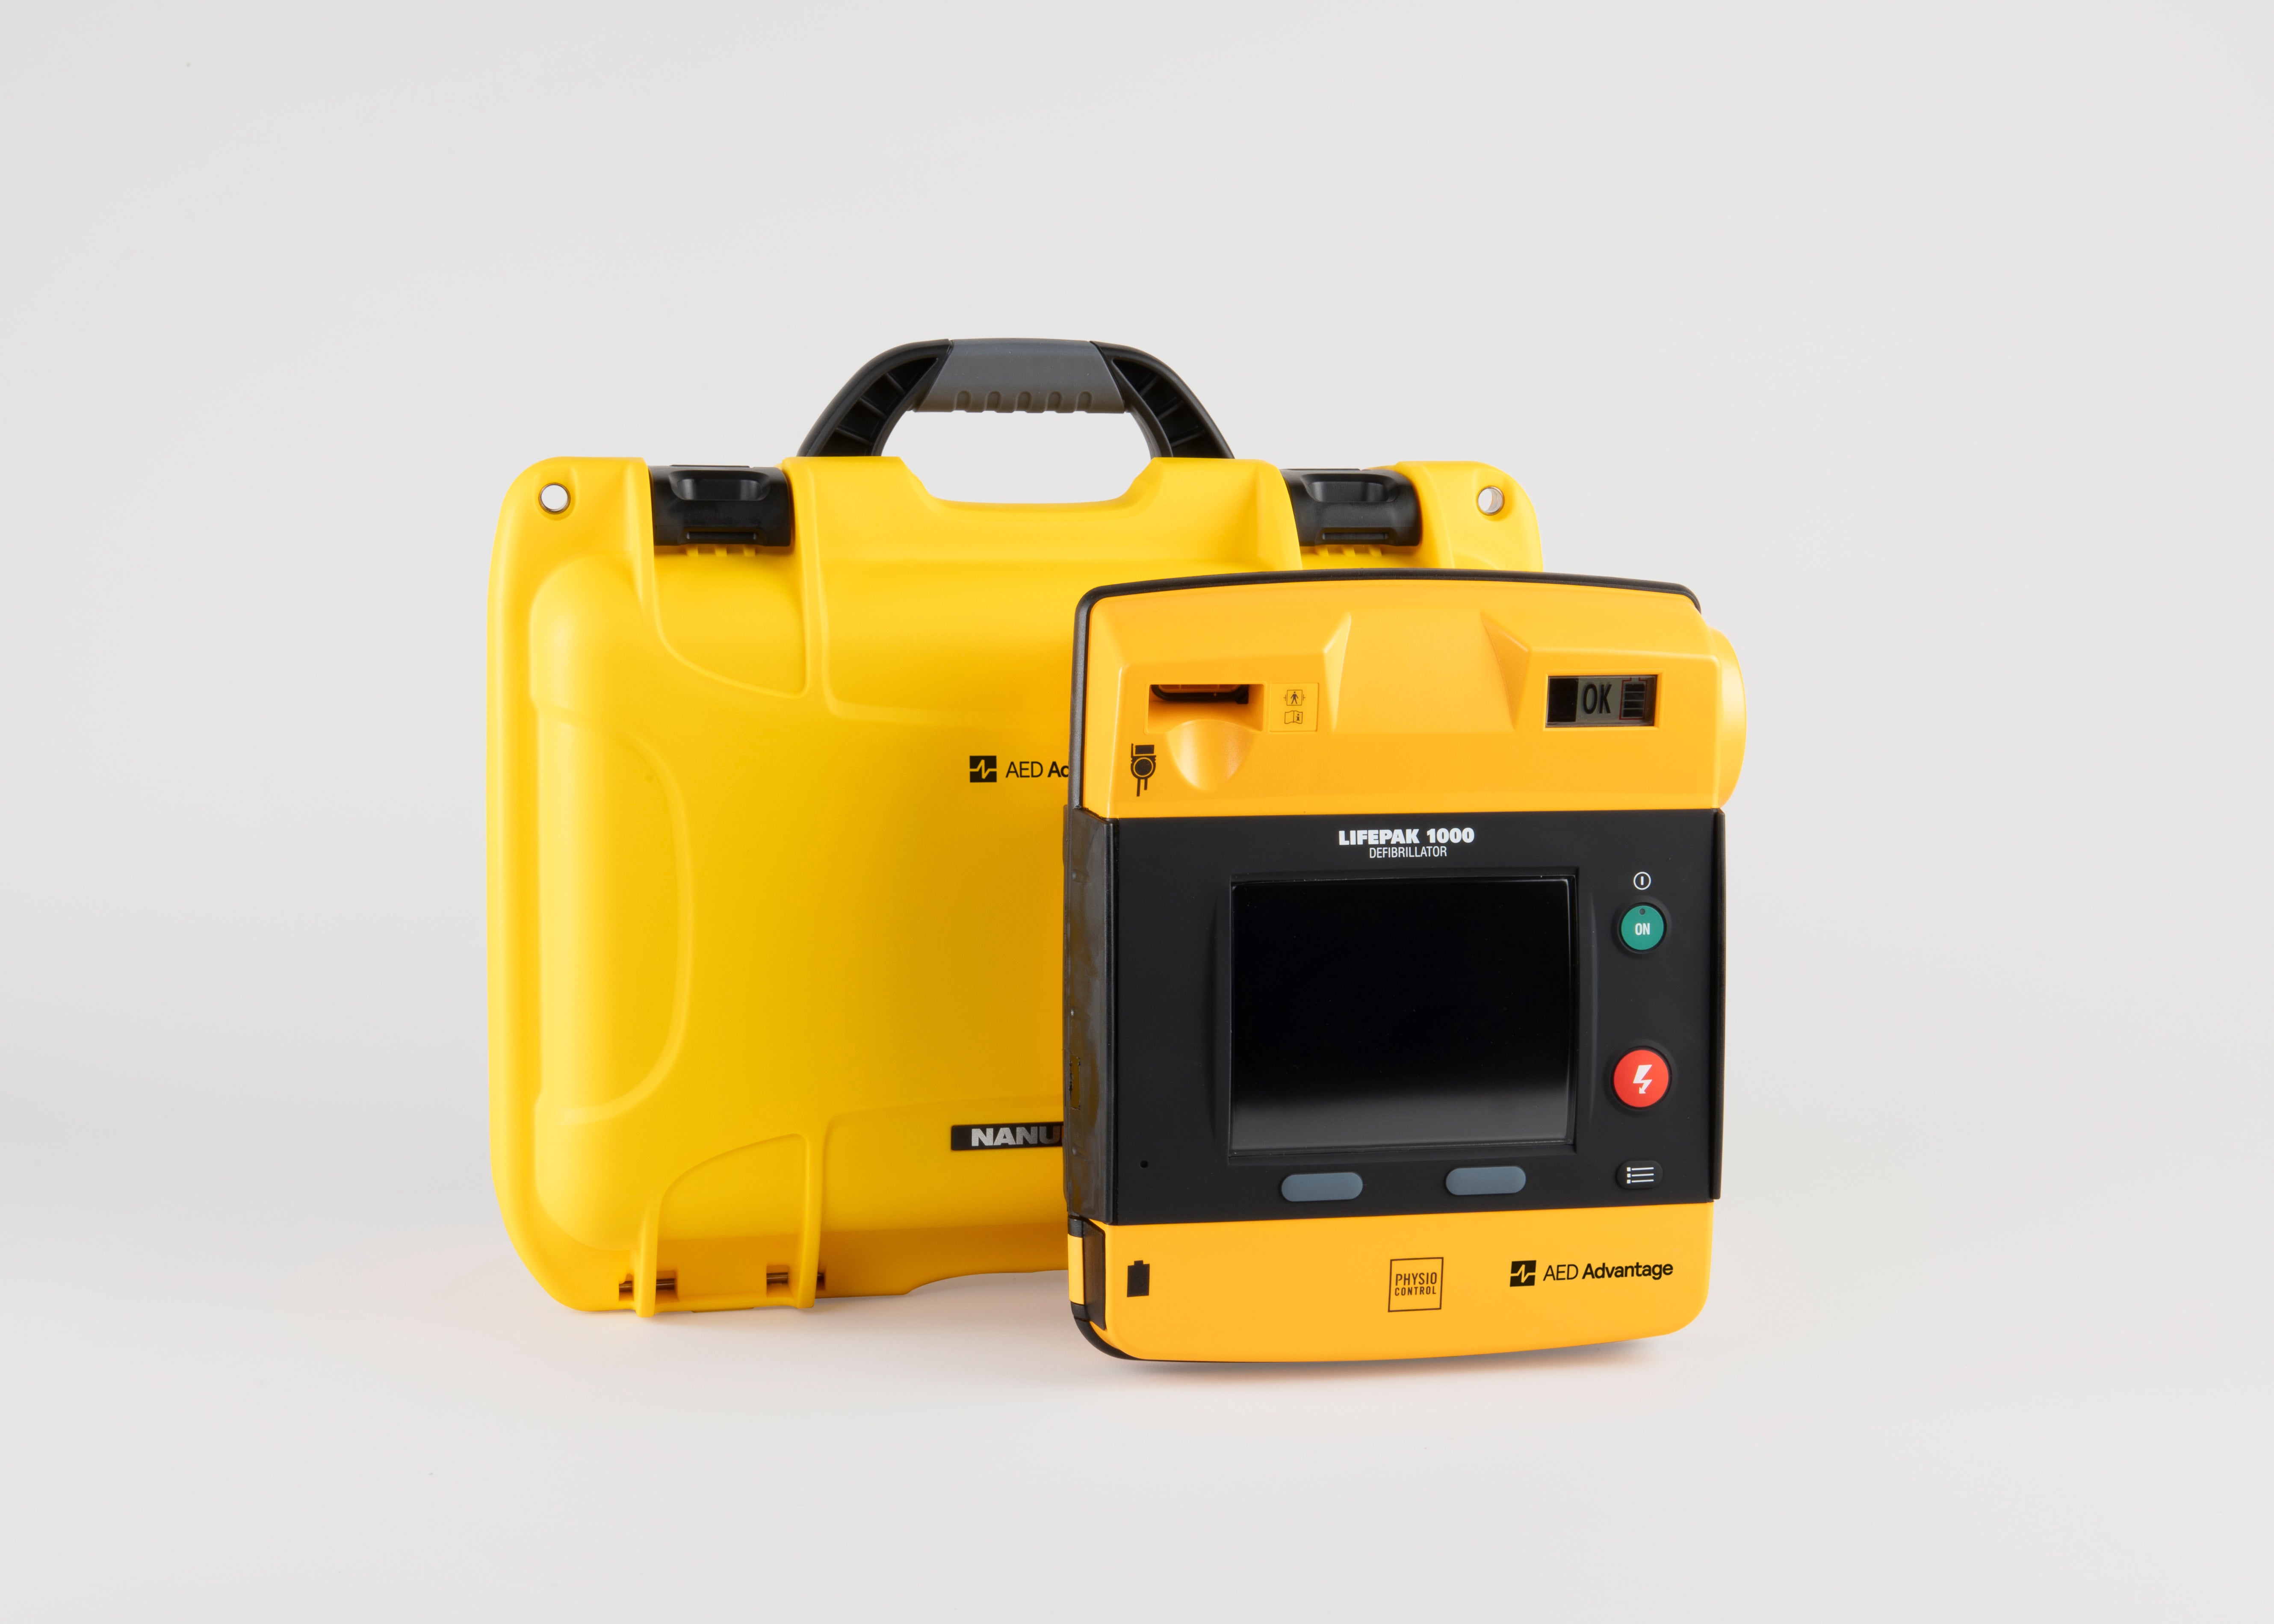 A black and yellow LIFEPAK 1000 AED machine with a bright yellow hardshell carry case